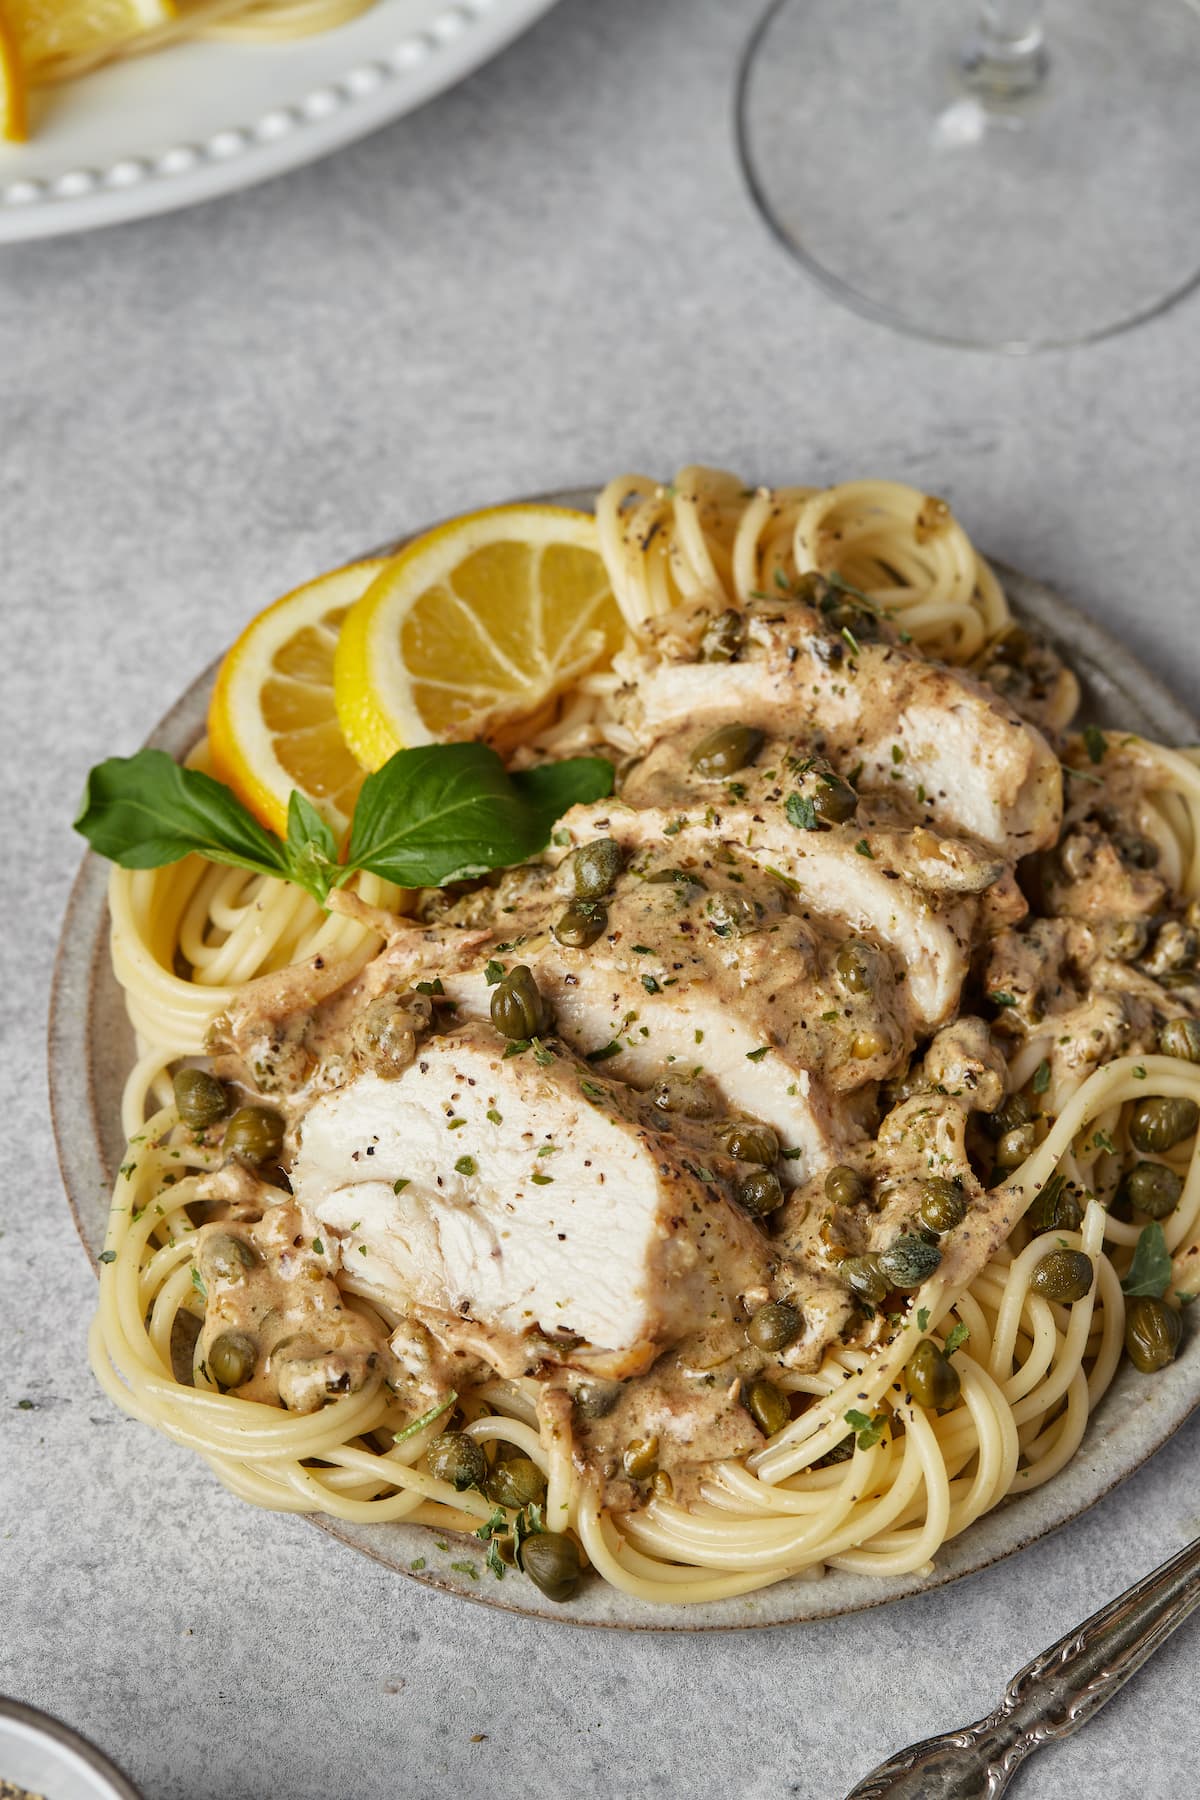 Sliced chicken piccata served over spaghetti and garnished with lemon slices.